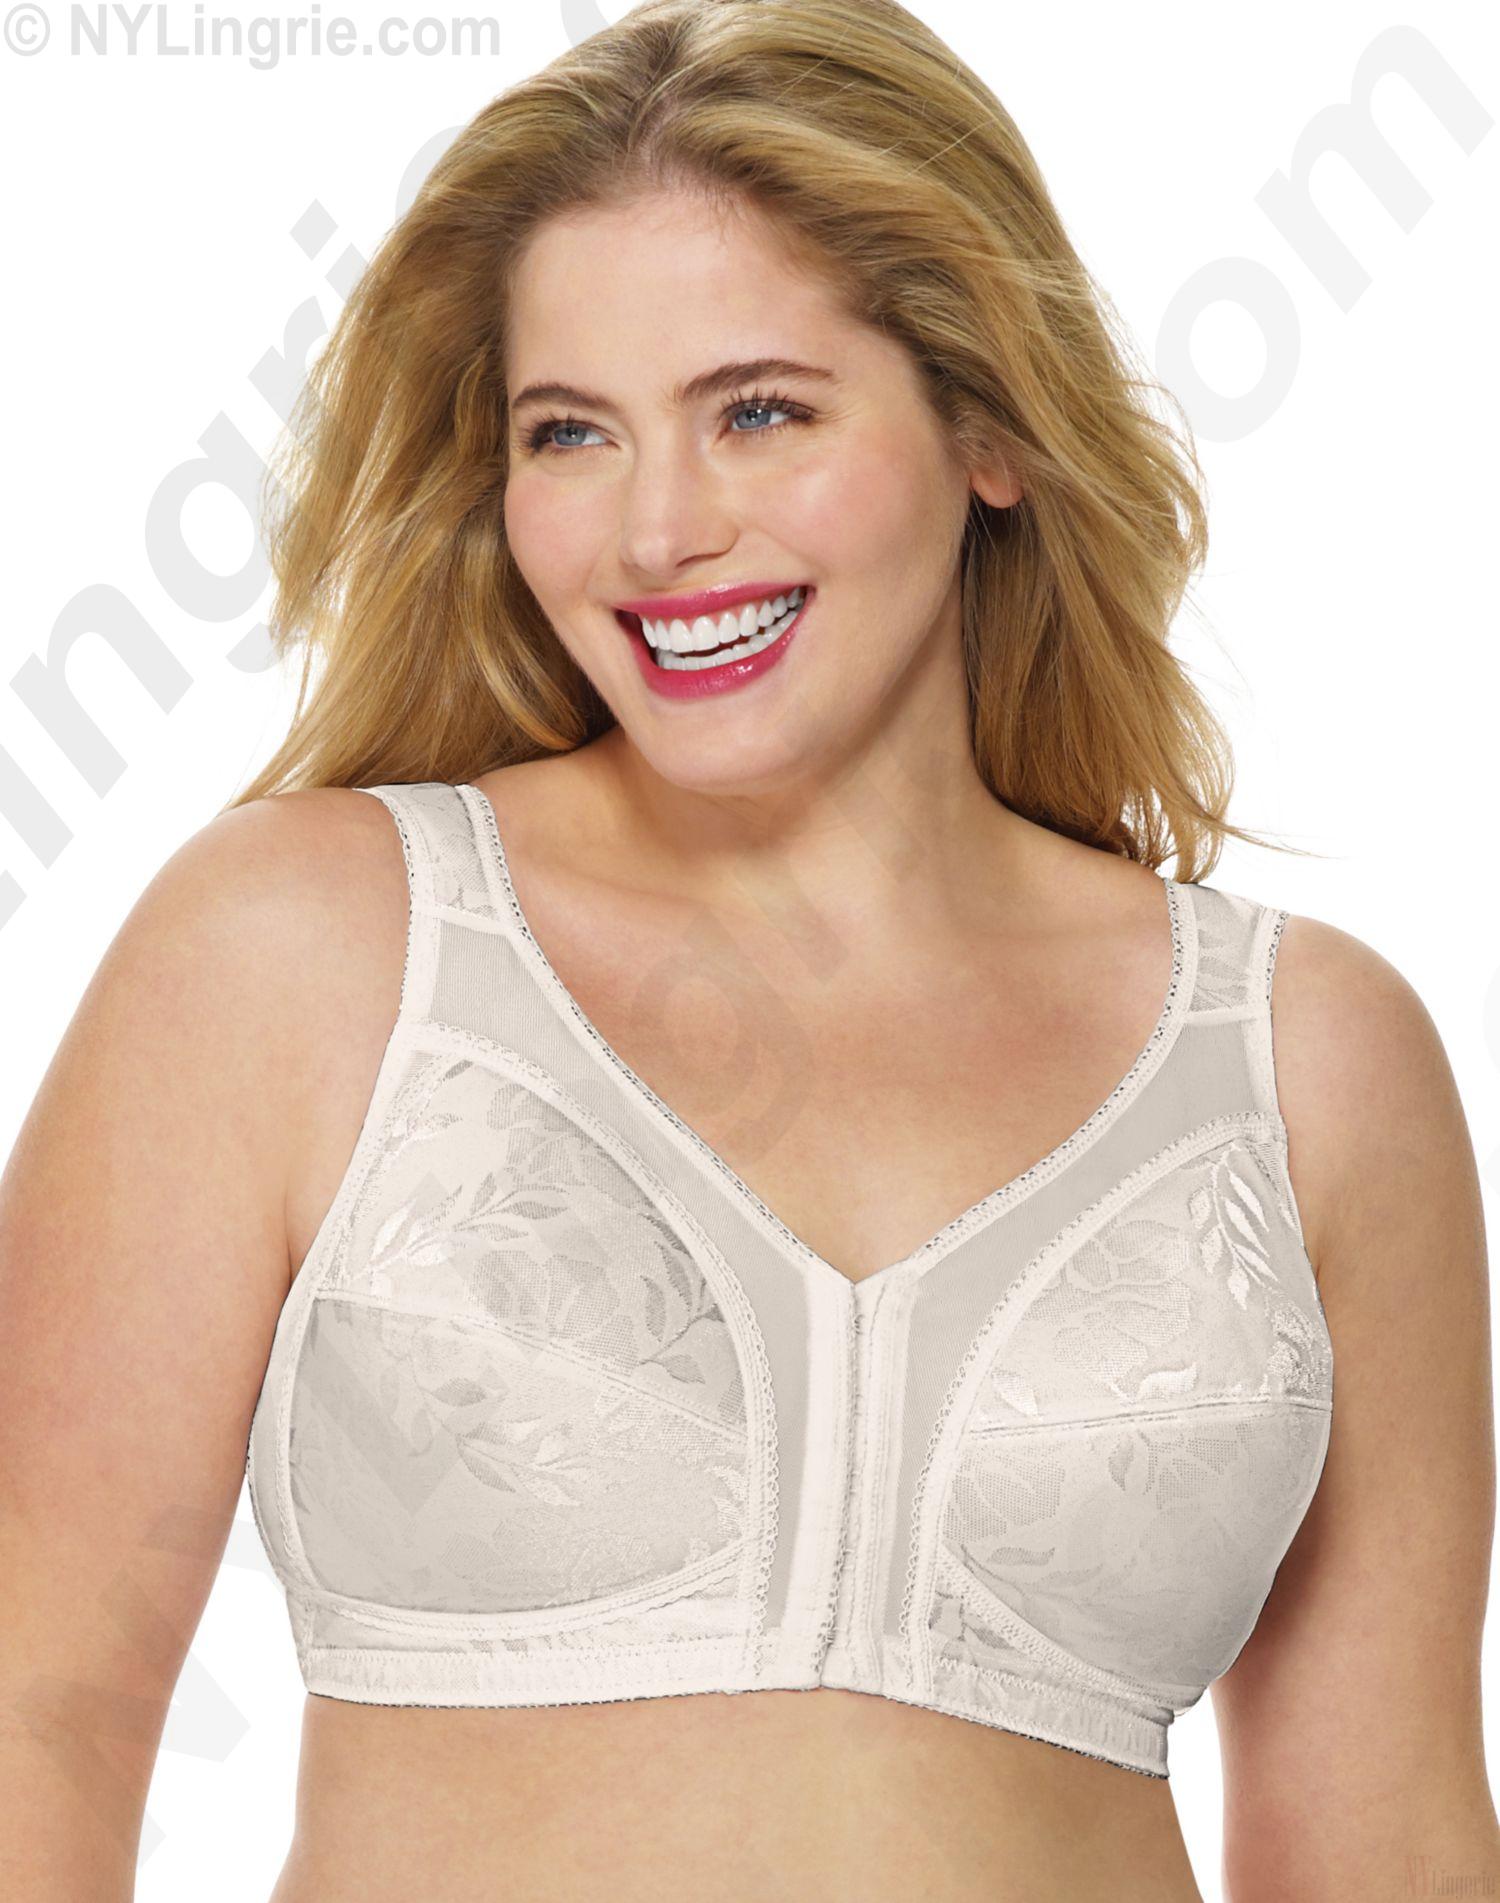 Playtex 18 Hour Wirefree White #4693 Bra 42C and 50 similar items